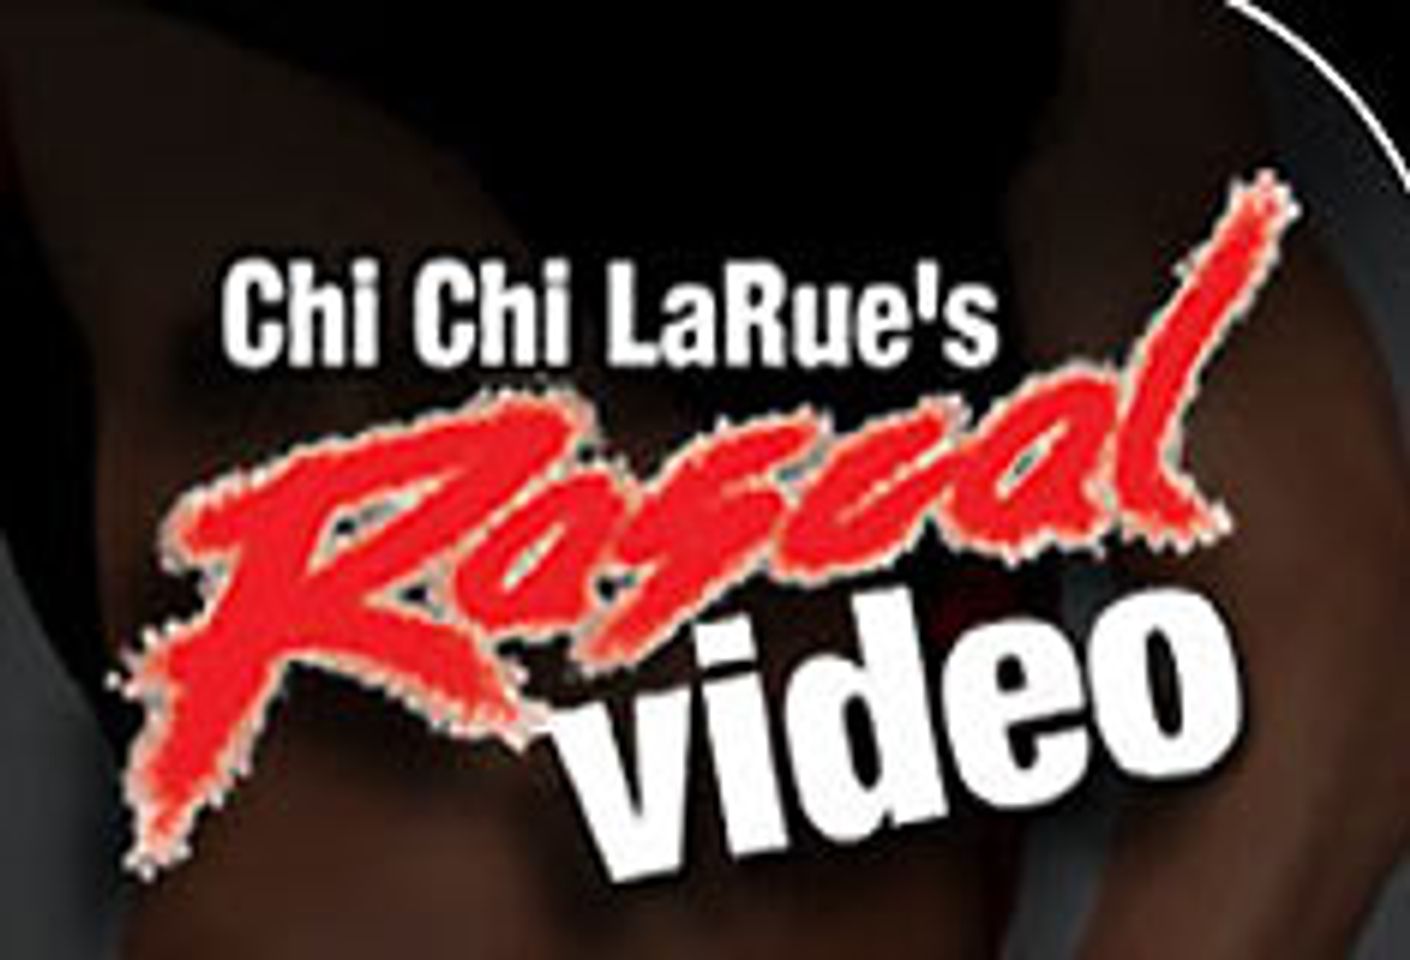 Chi Chi LaRue's Rascal Video to Premiere on Nakedsword.com